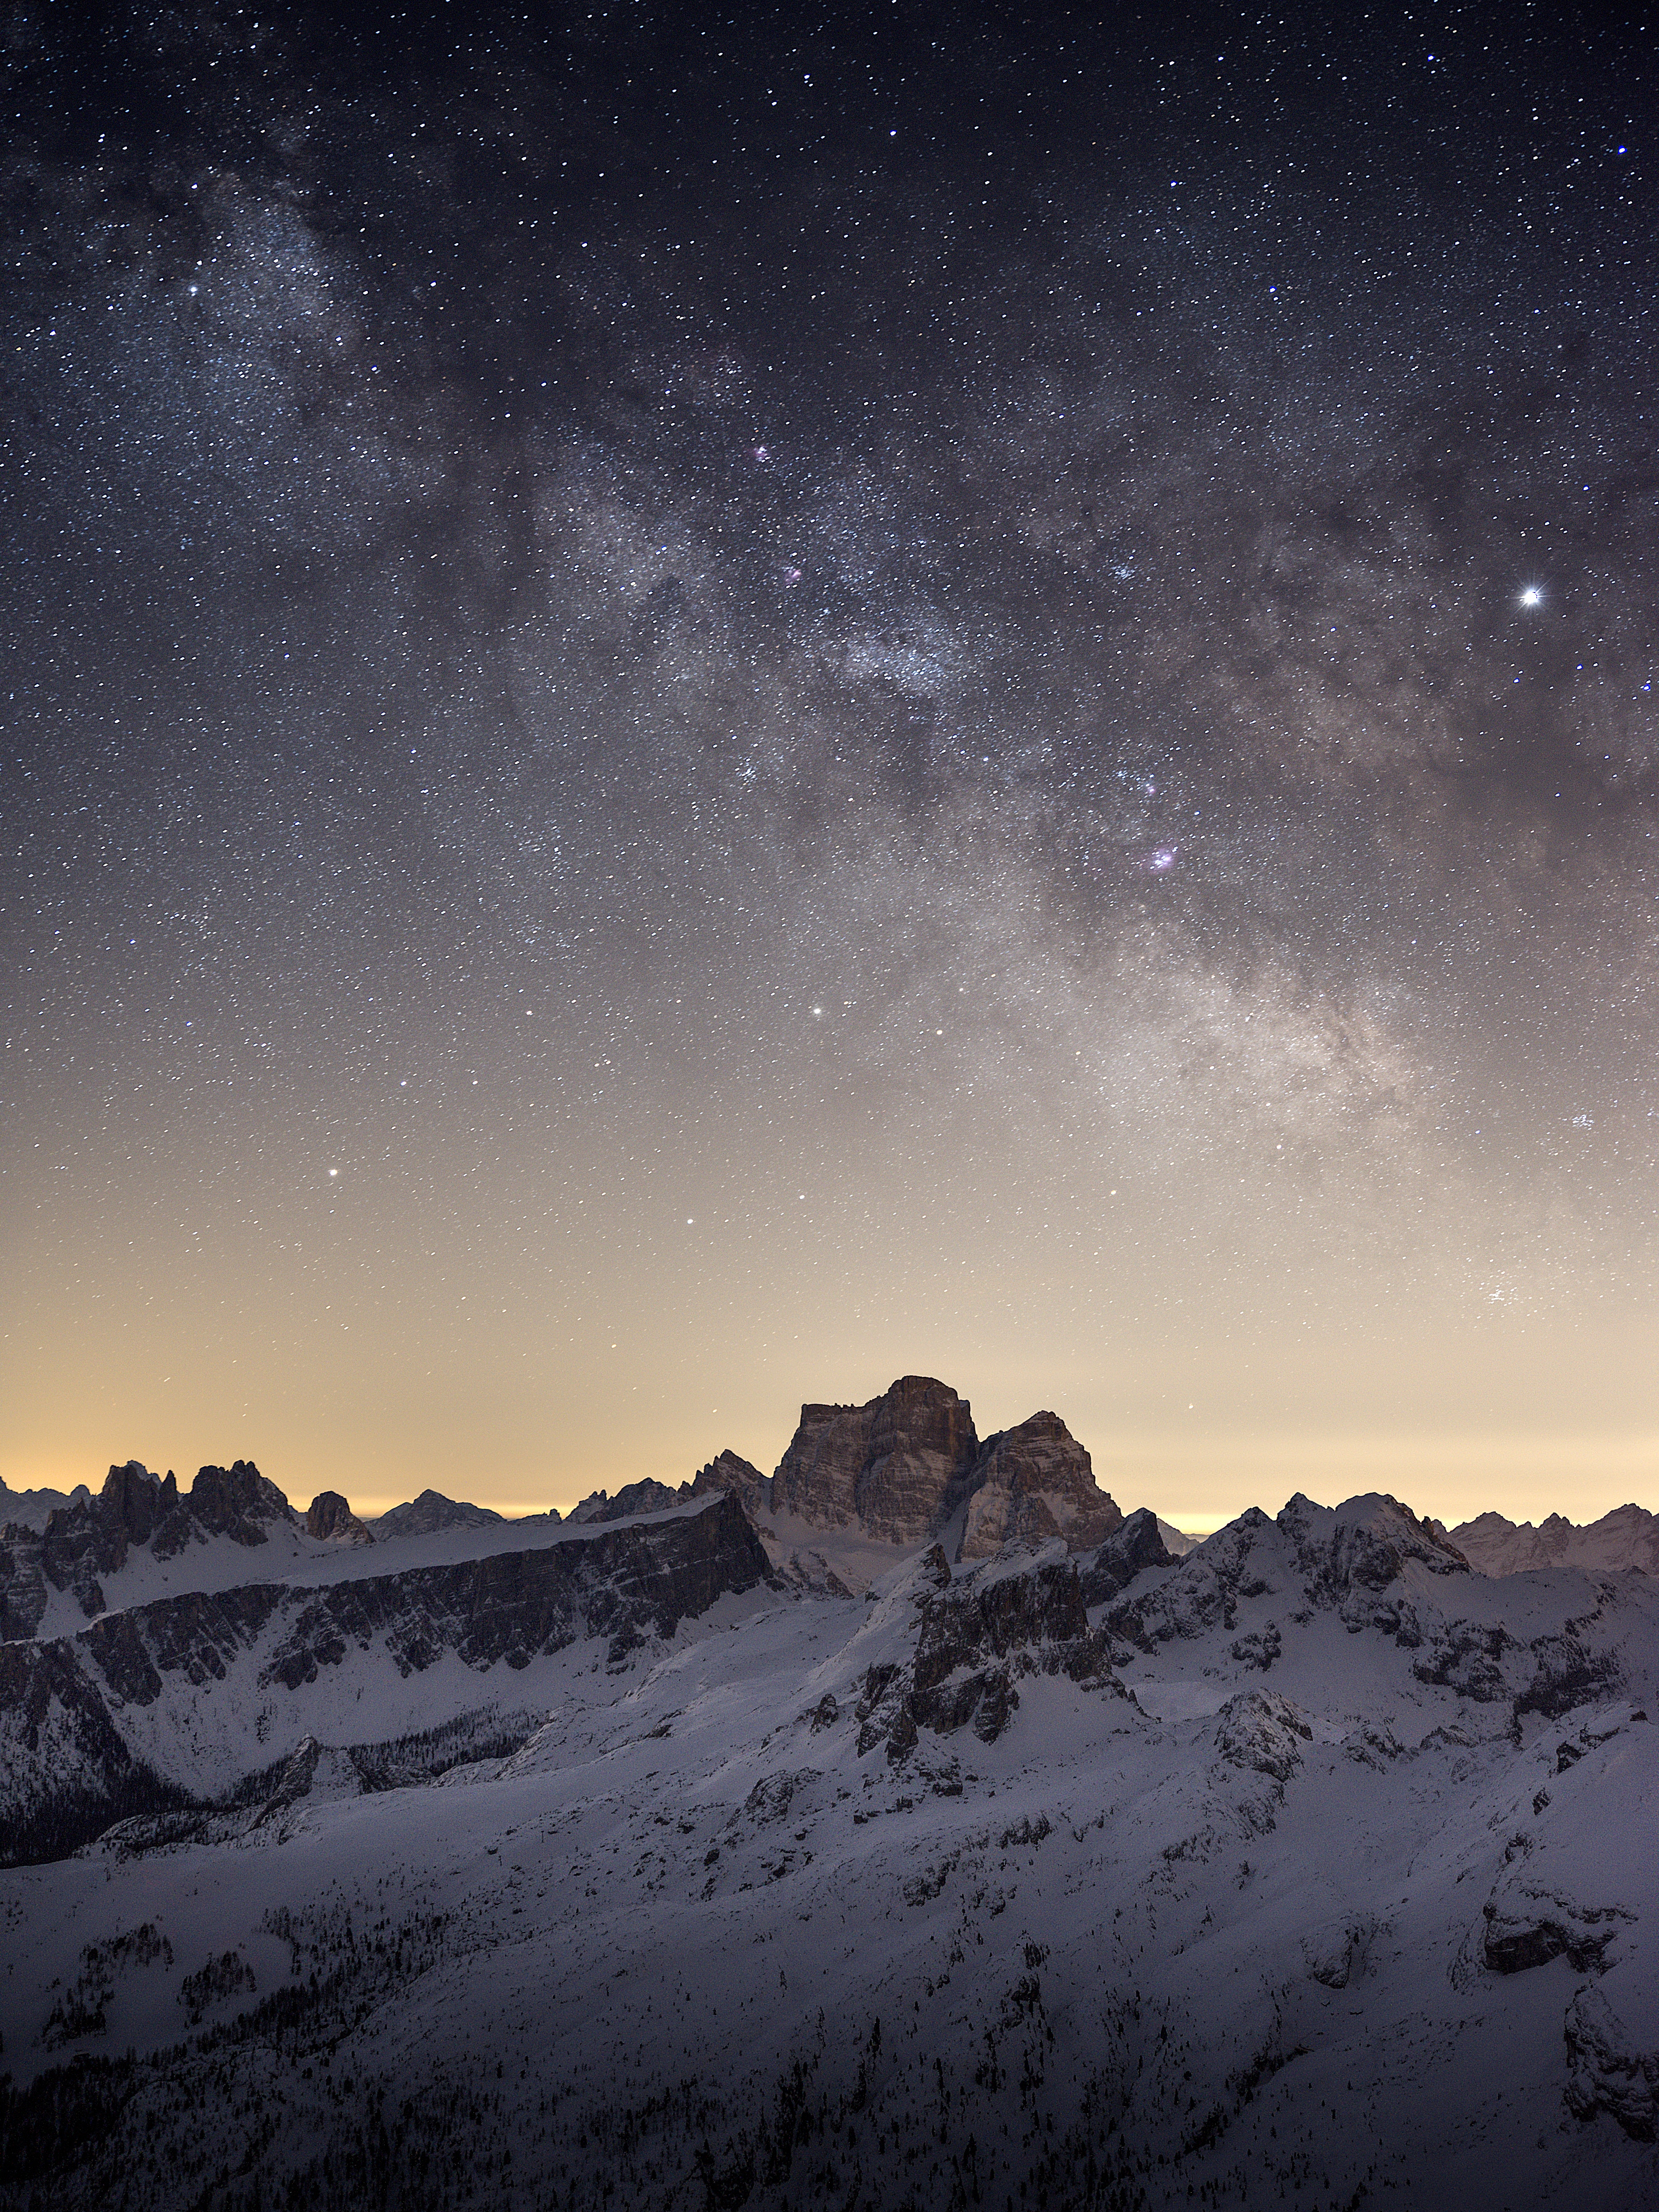 Snowy Mountains At Starry Night Wallpapers